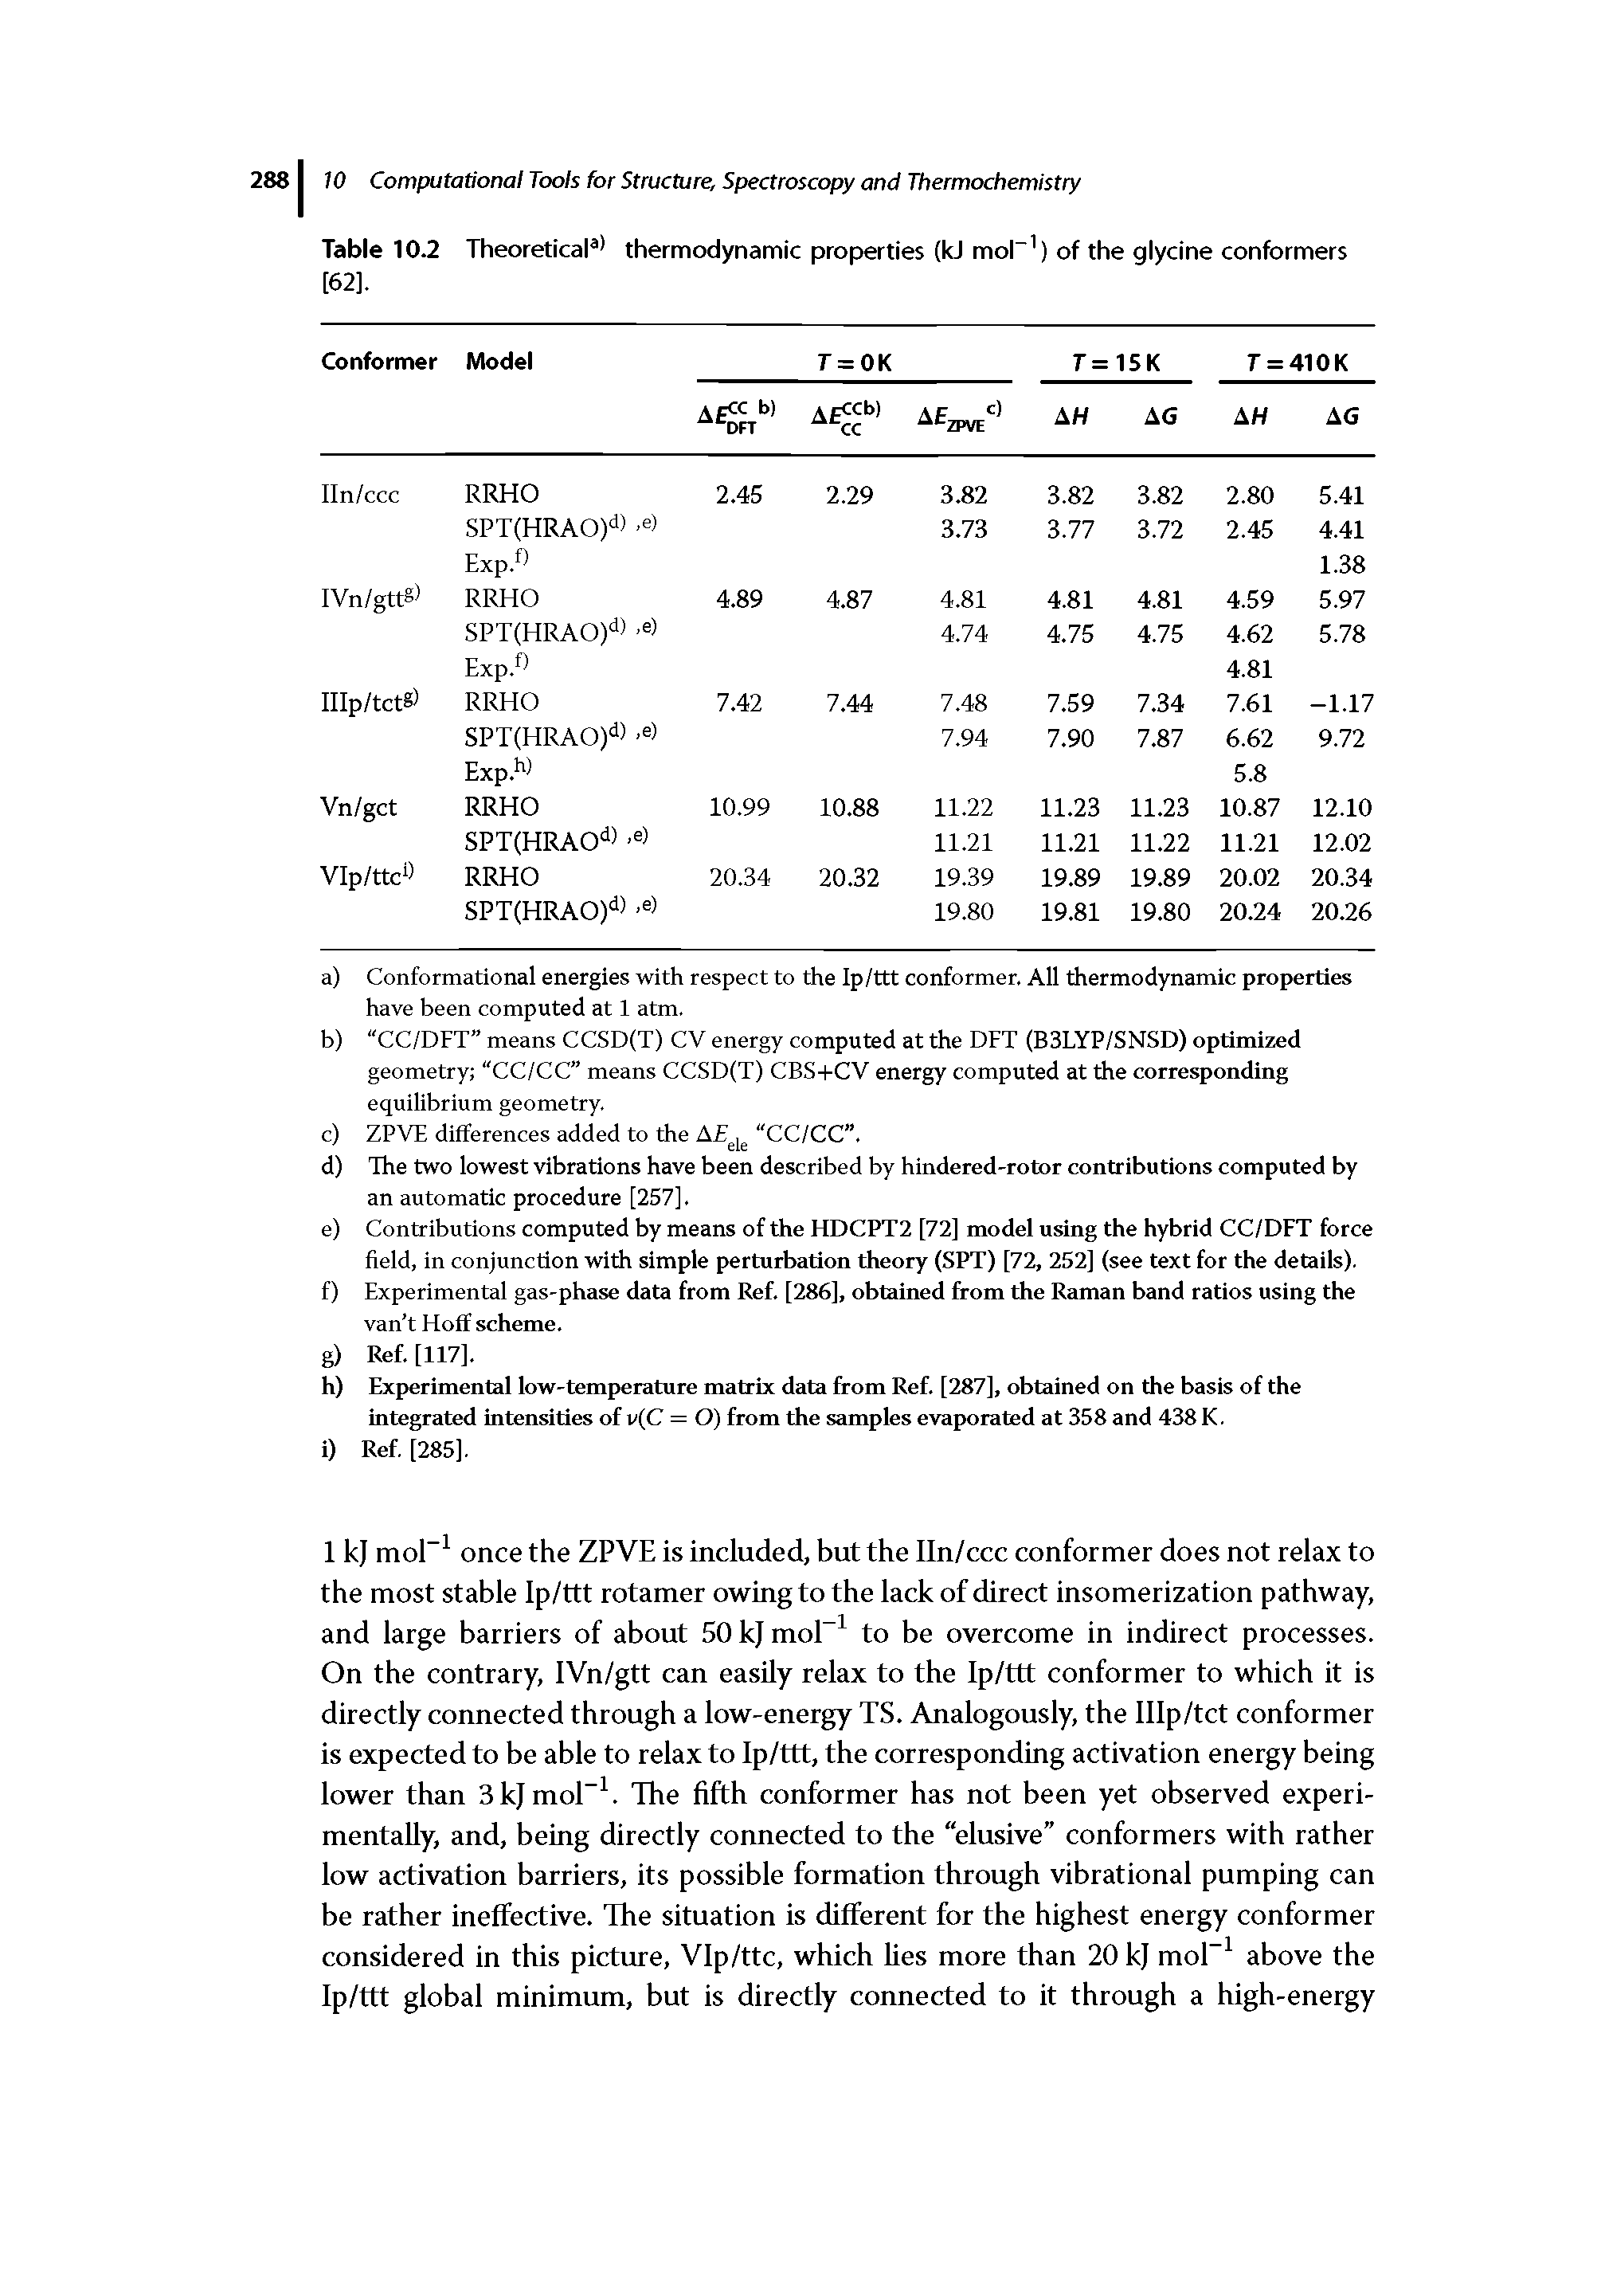 Table 10.2 Theoretical thermodynamic properties (kJ mor ) of the glycine conformers [62].